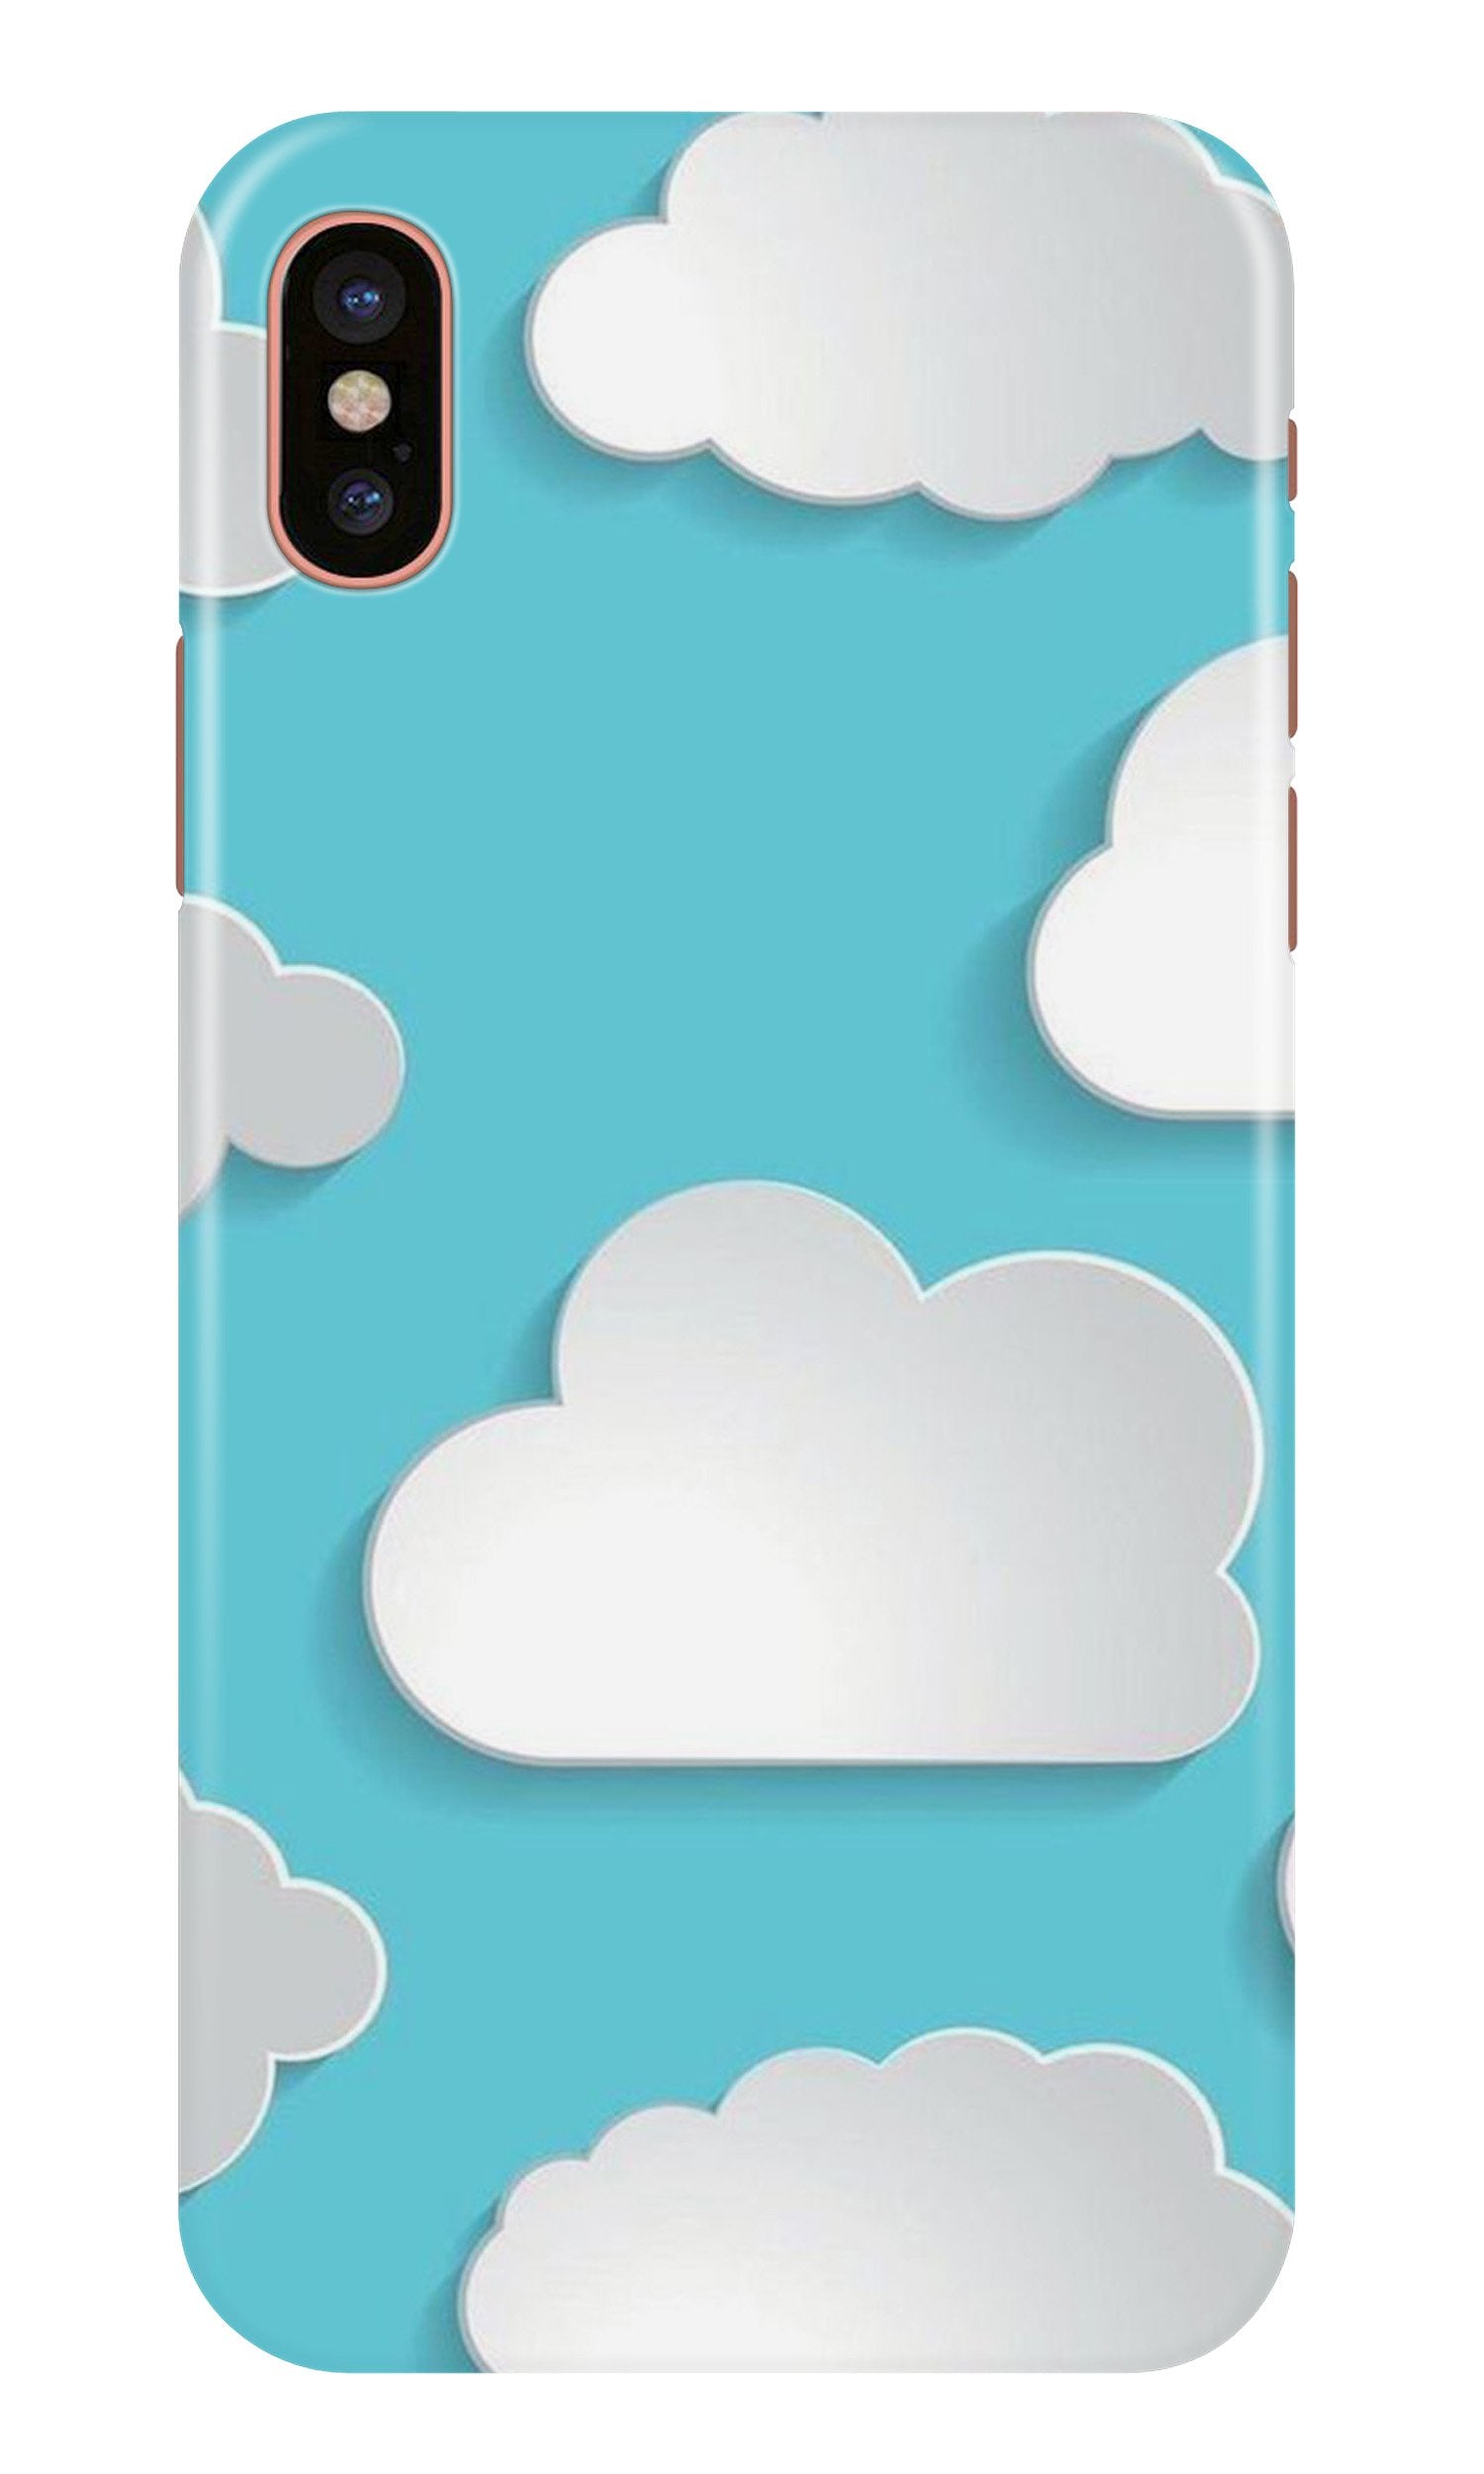 Clouds Case for iPhone Xs Max (Design No. 210)